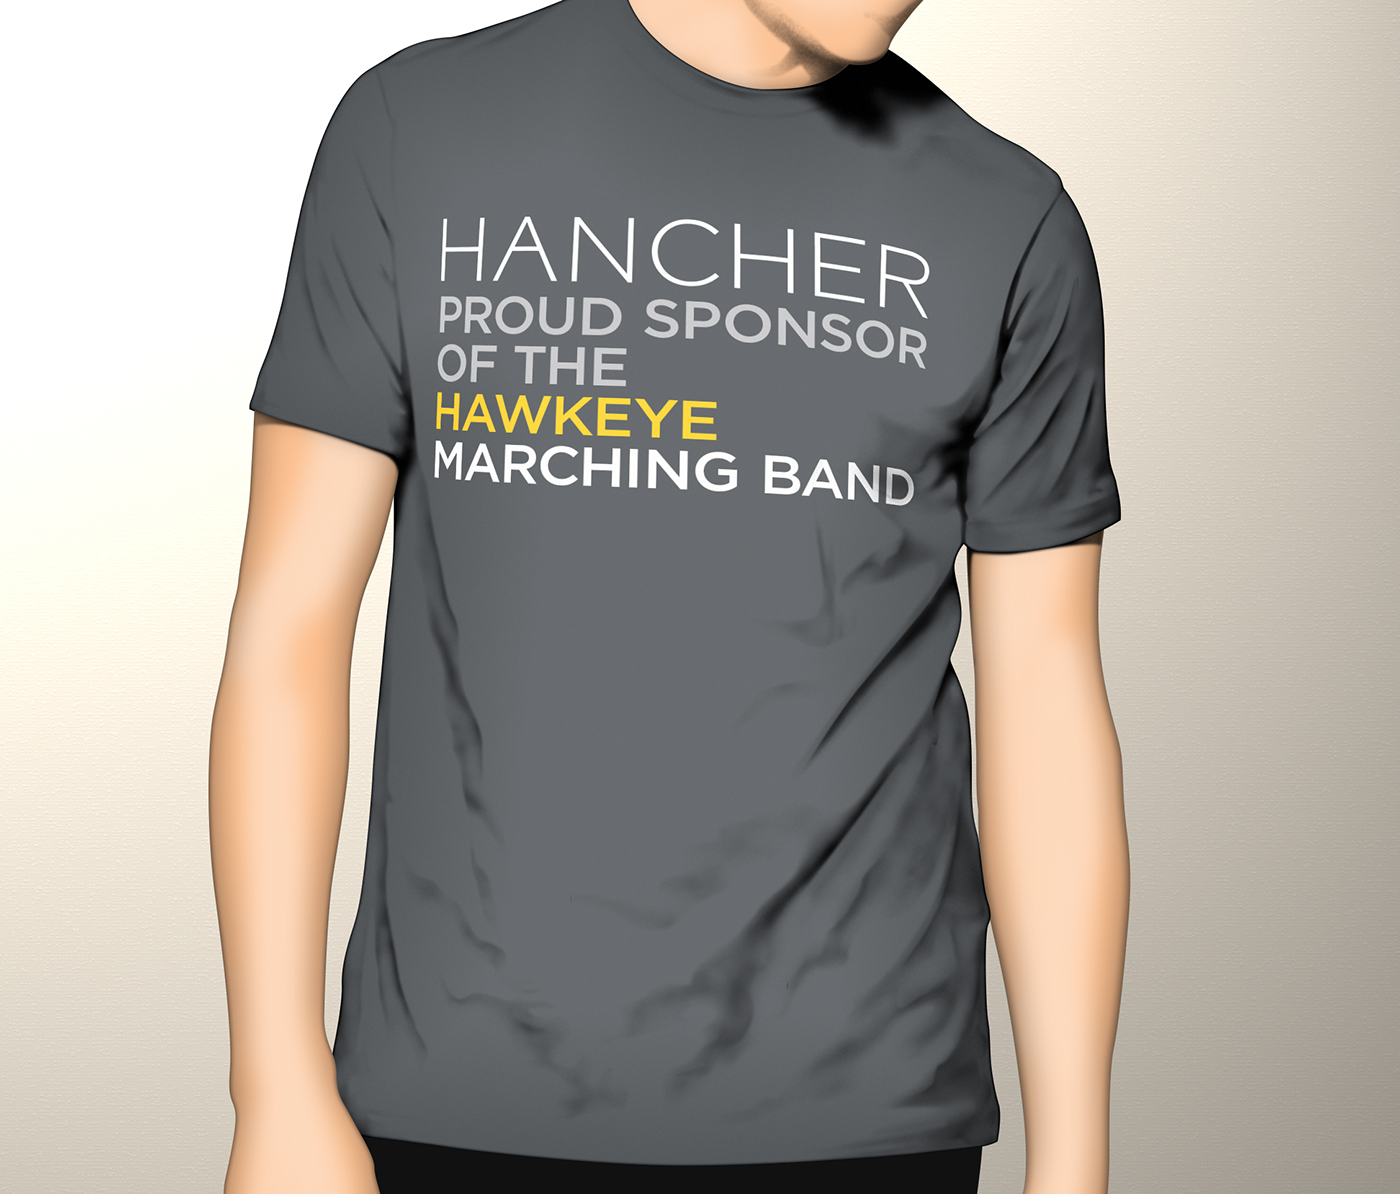 t-shirt design music band staff marching band measure hancher